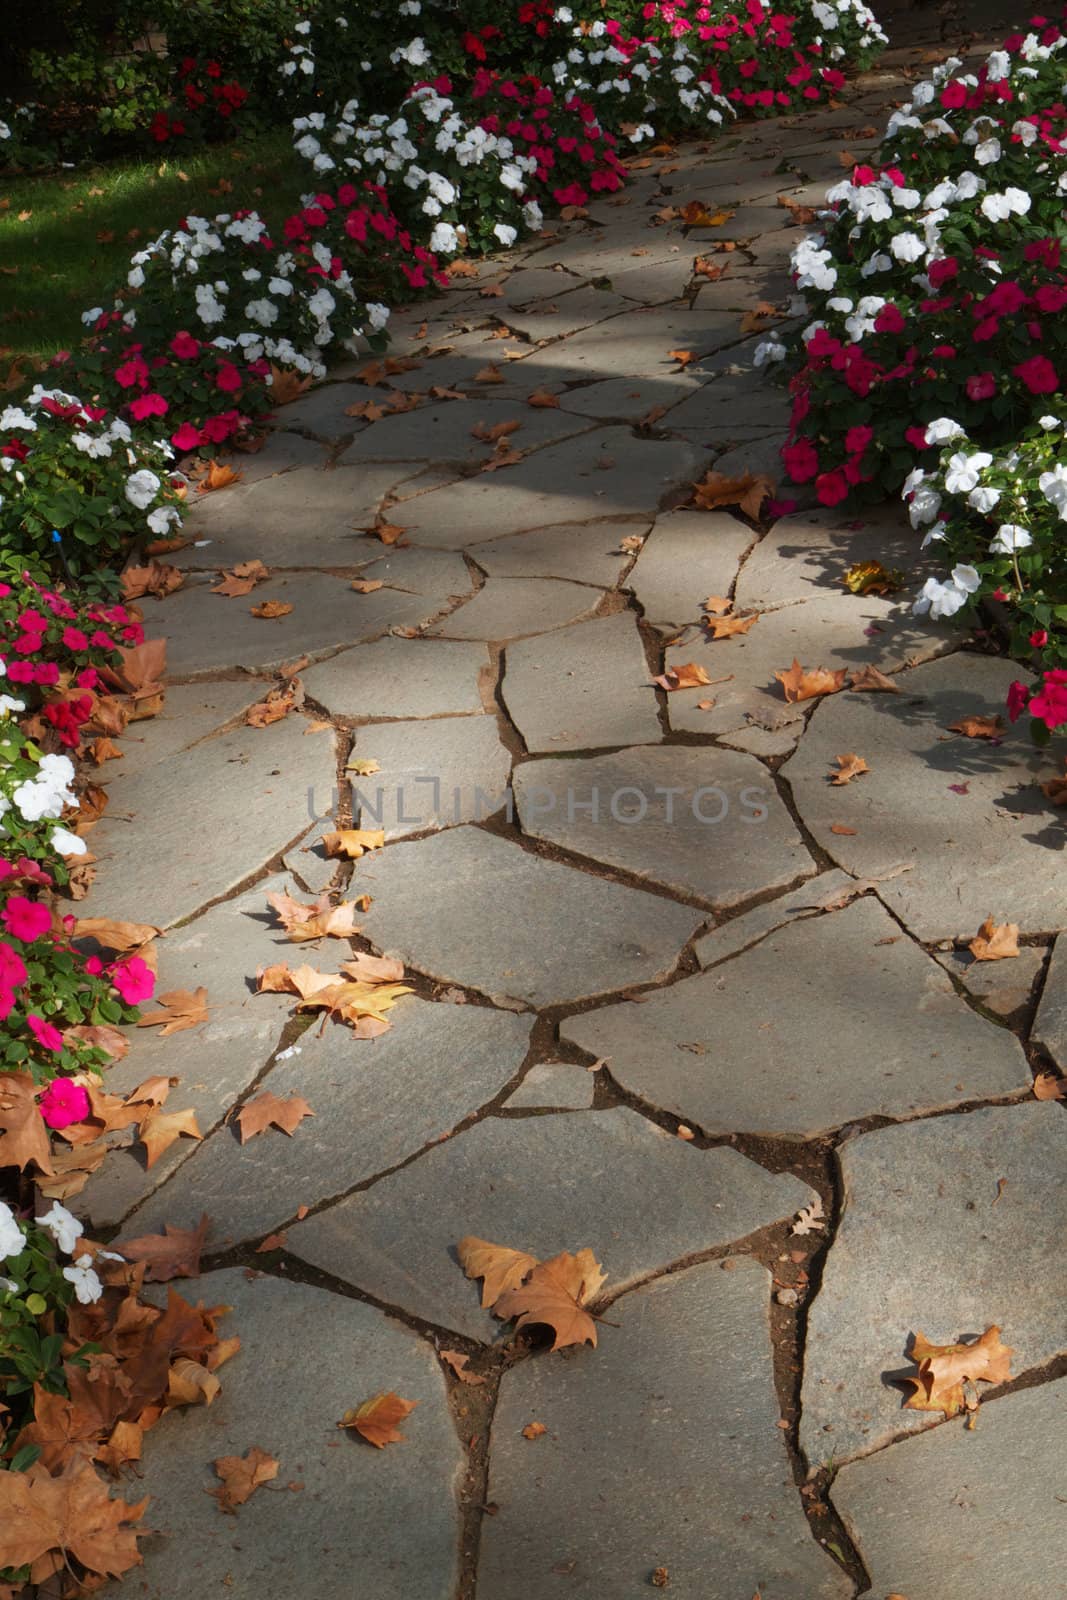 Red and white Flower boardered rock path with fall leaves